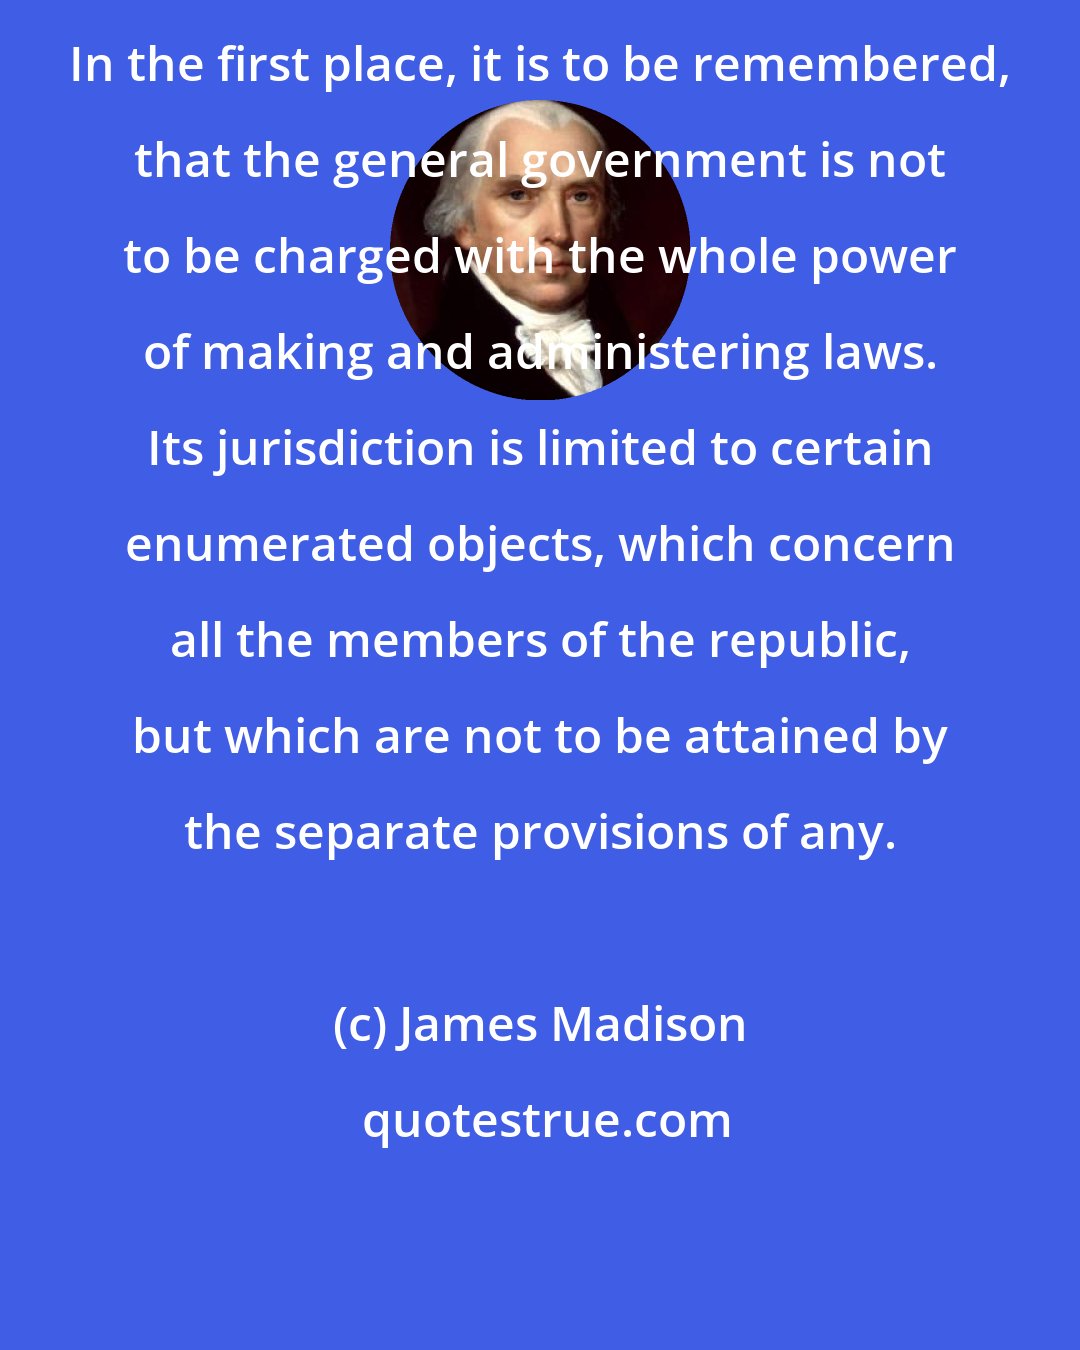 James Madison: In the first place, it is to be remembered, that the general government is not to be charged with the whole power of making and administering laws. Its jurisdiction is limited to certain enumerated objects, which concern all the members of the republic, but which are not to be attained by the separate provisions of any.